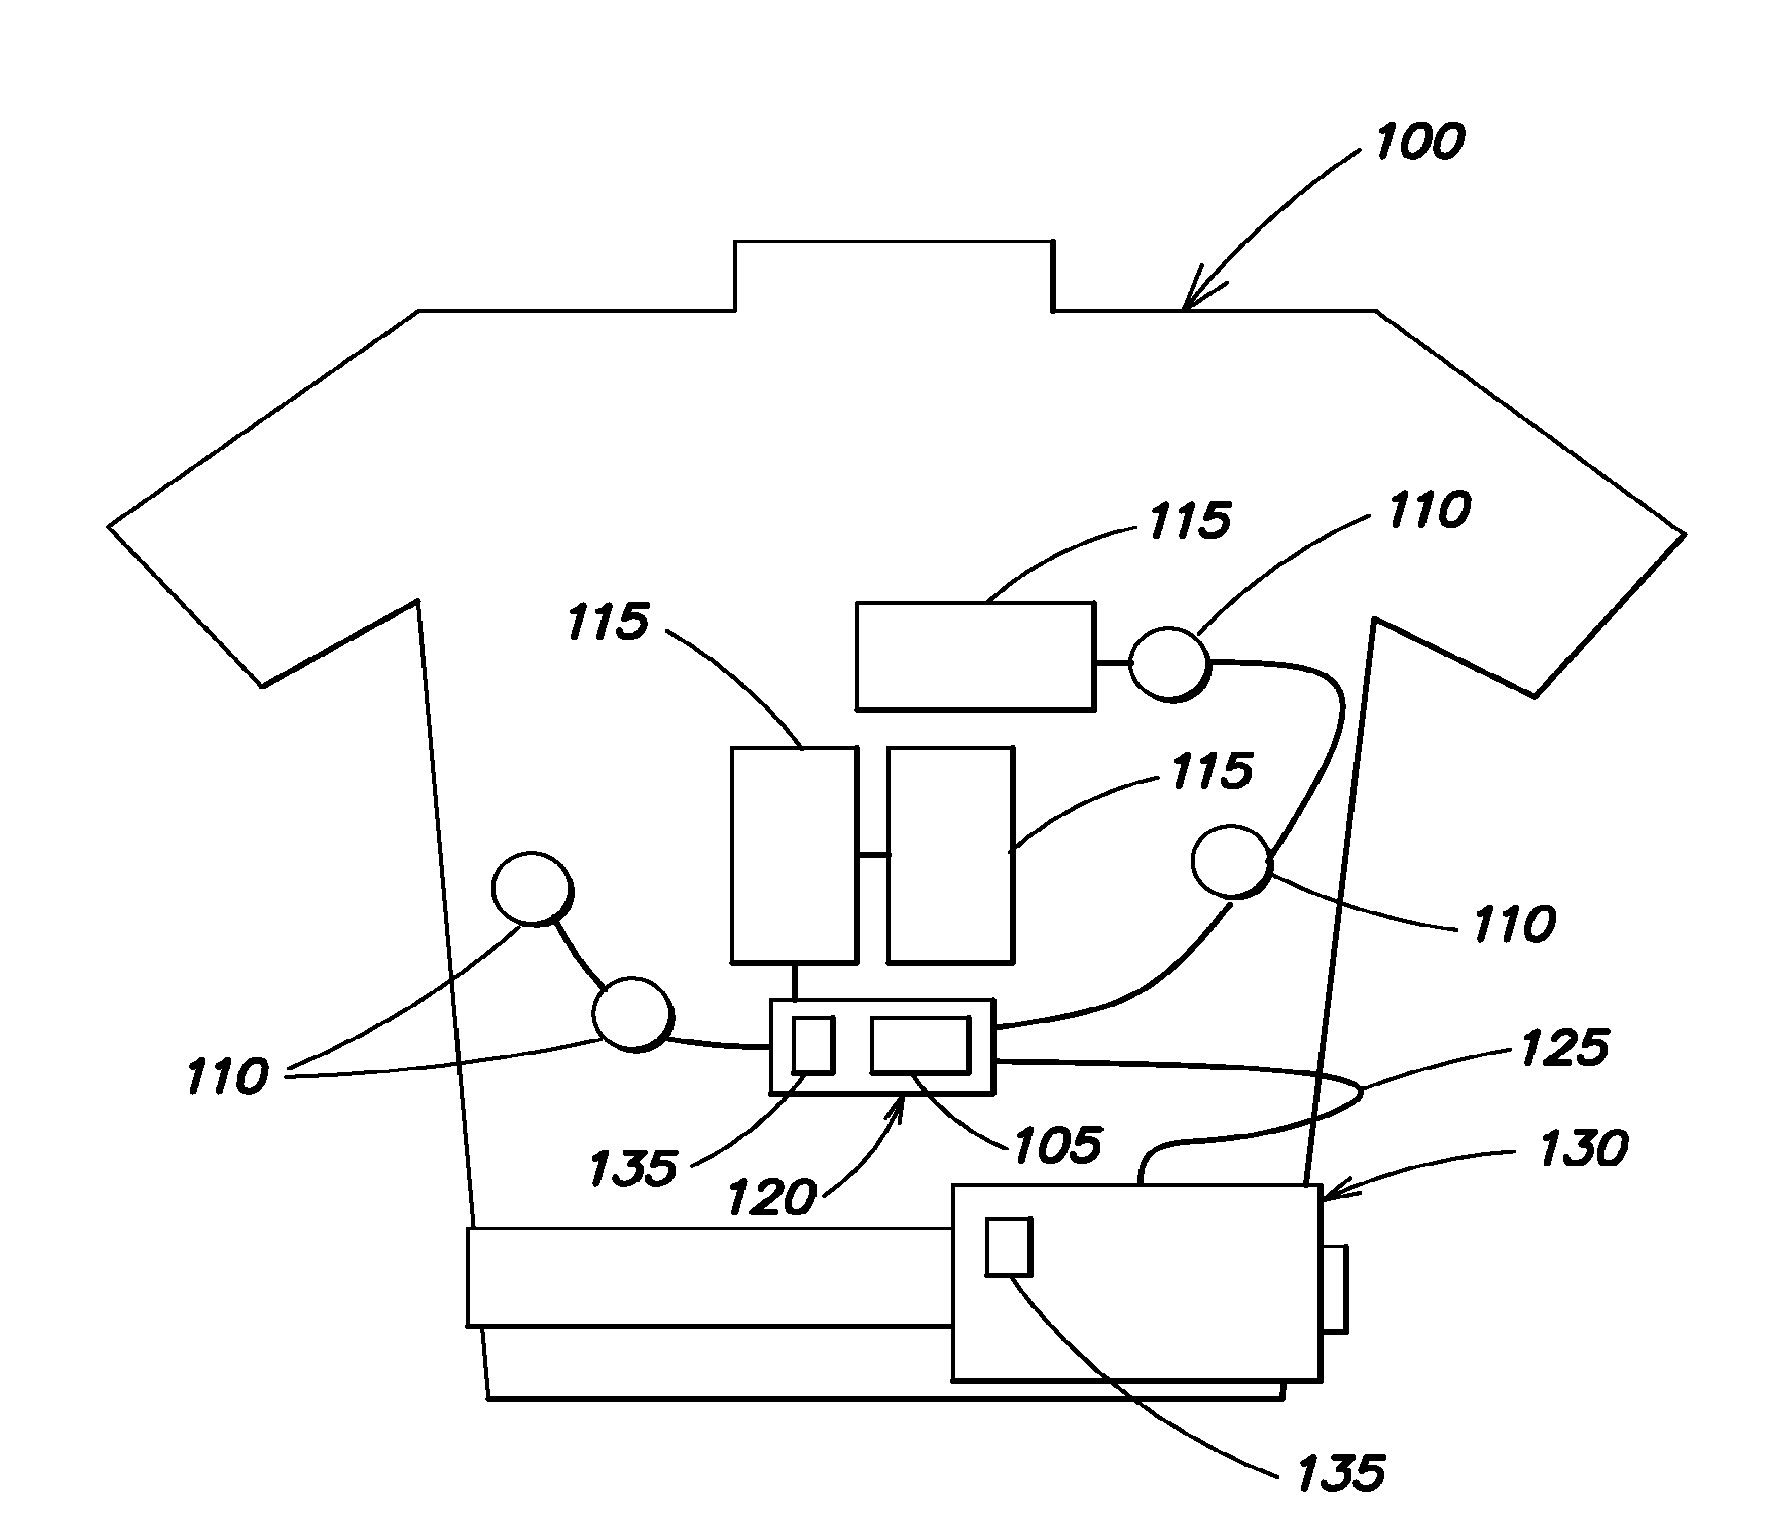 Systems and methods for configuring a wearable medical monitoring and/or treatment device